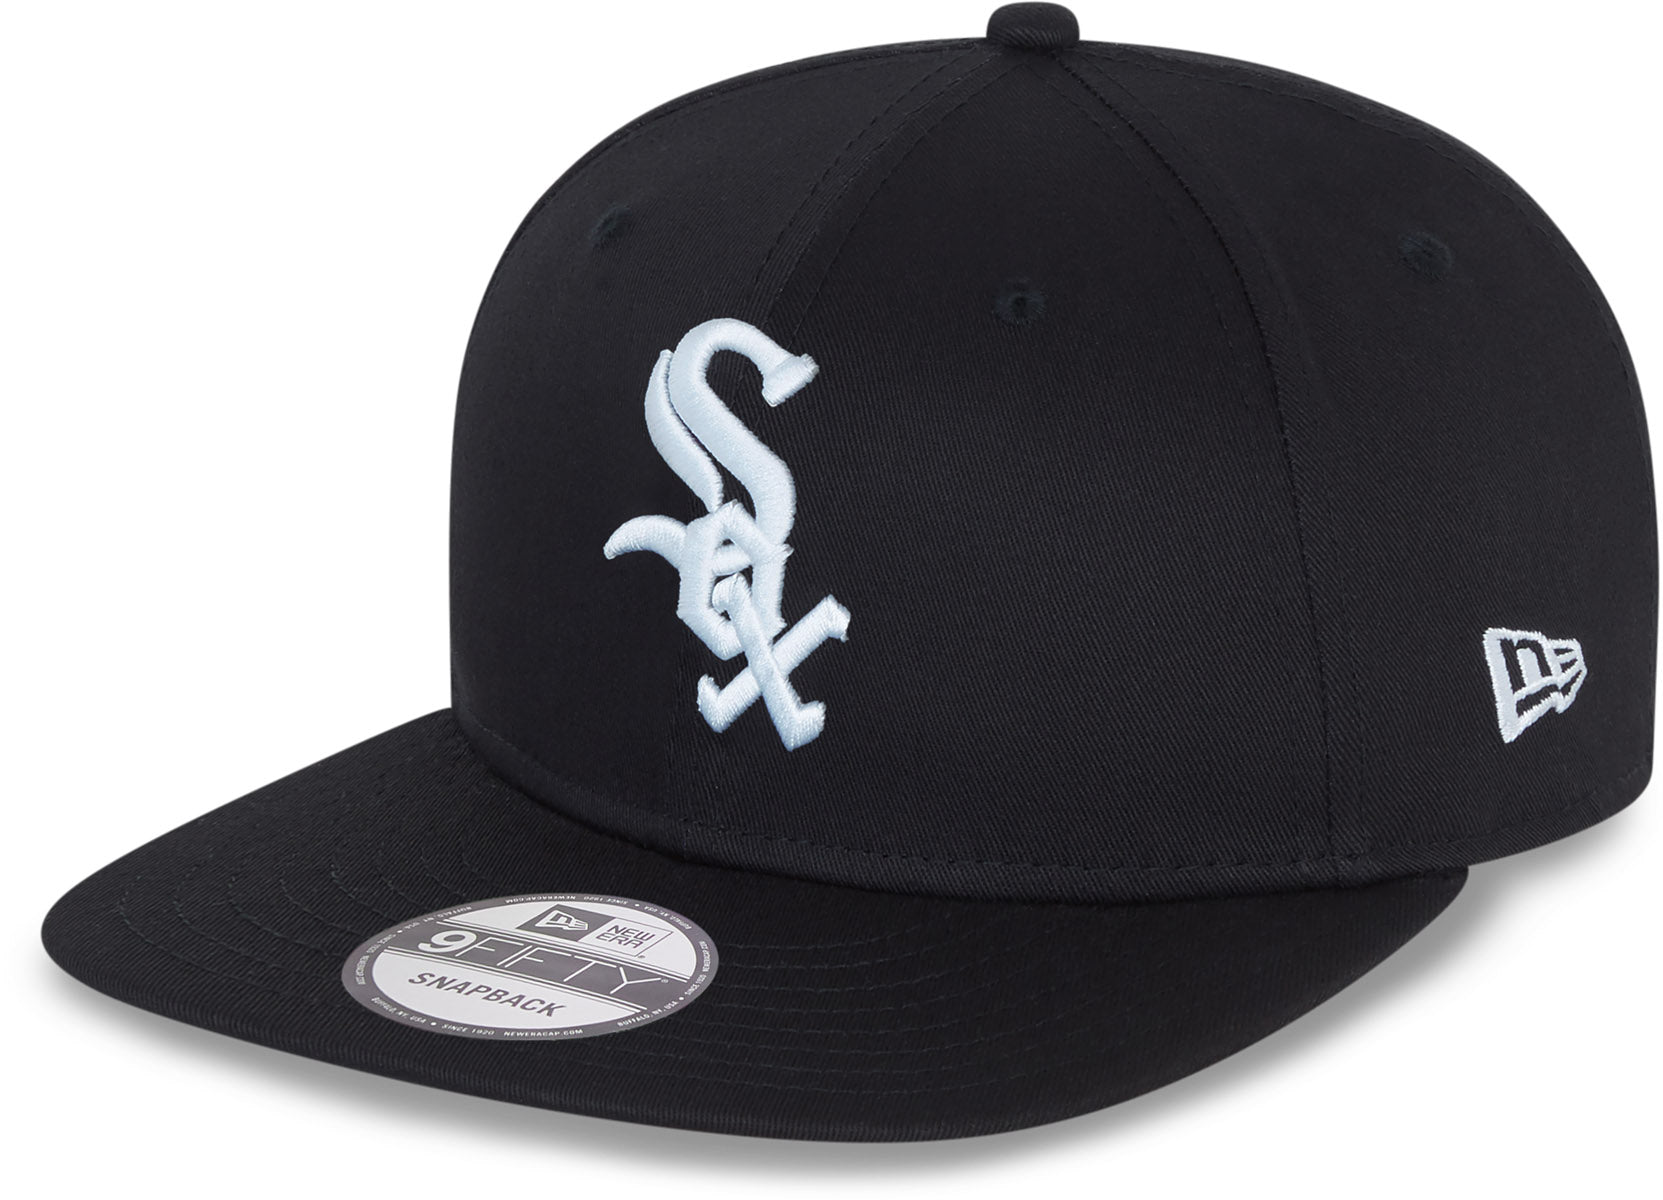 Help fight prostate cancer with these special Fathers Day MLB caps from  Fanatics  mlivecom